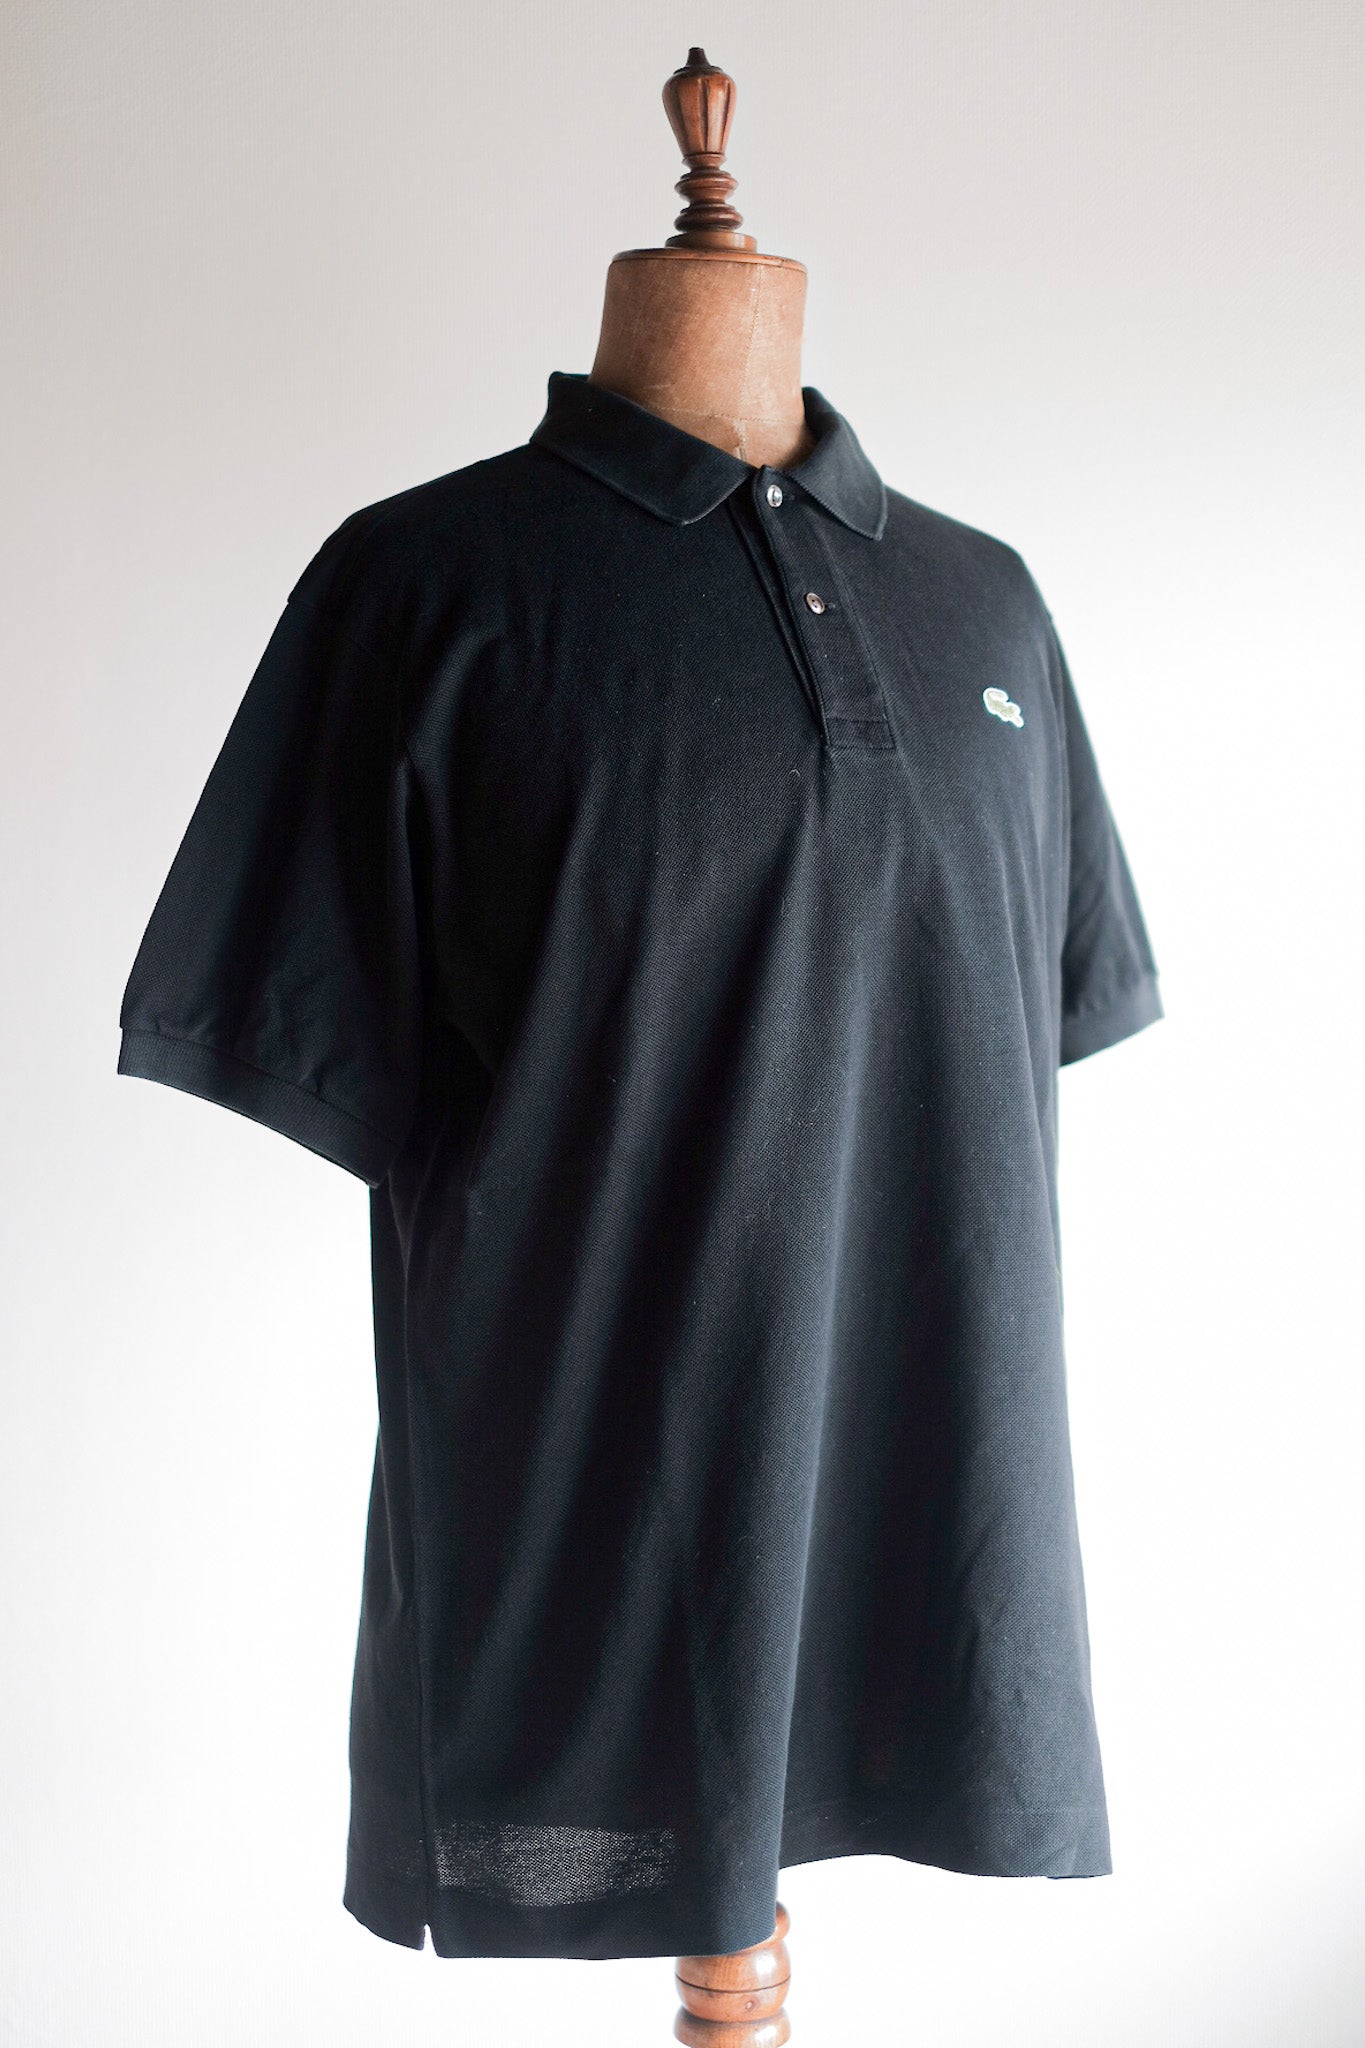 [~ 80's] Chemise Lacoste S / S Polo Taille.5 "Black"